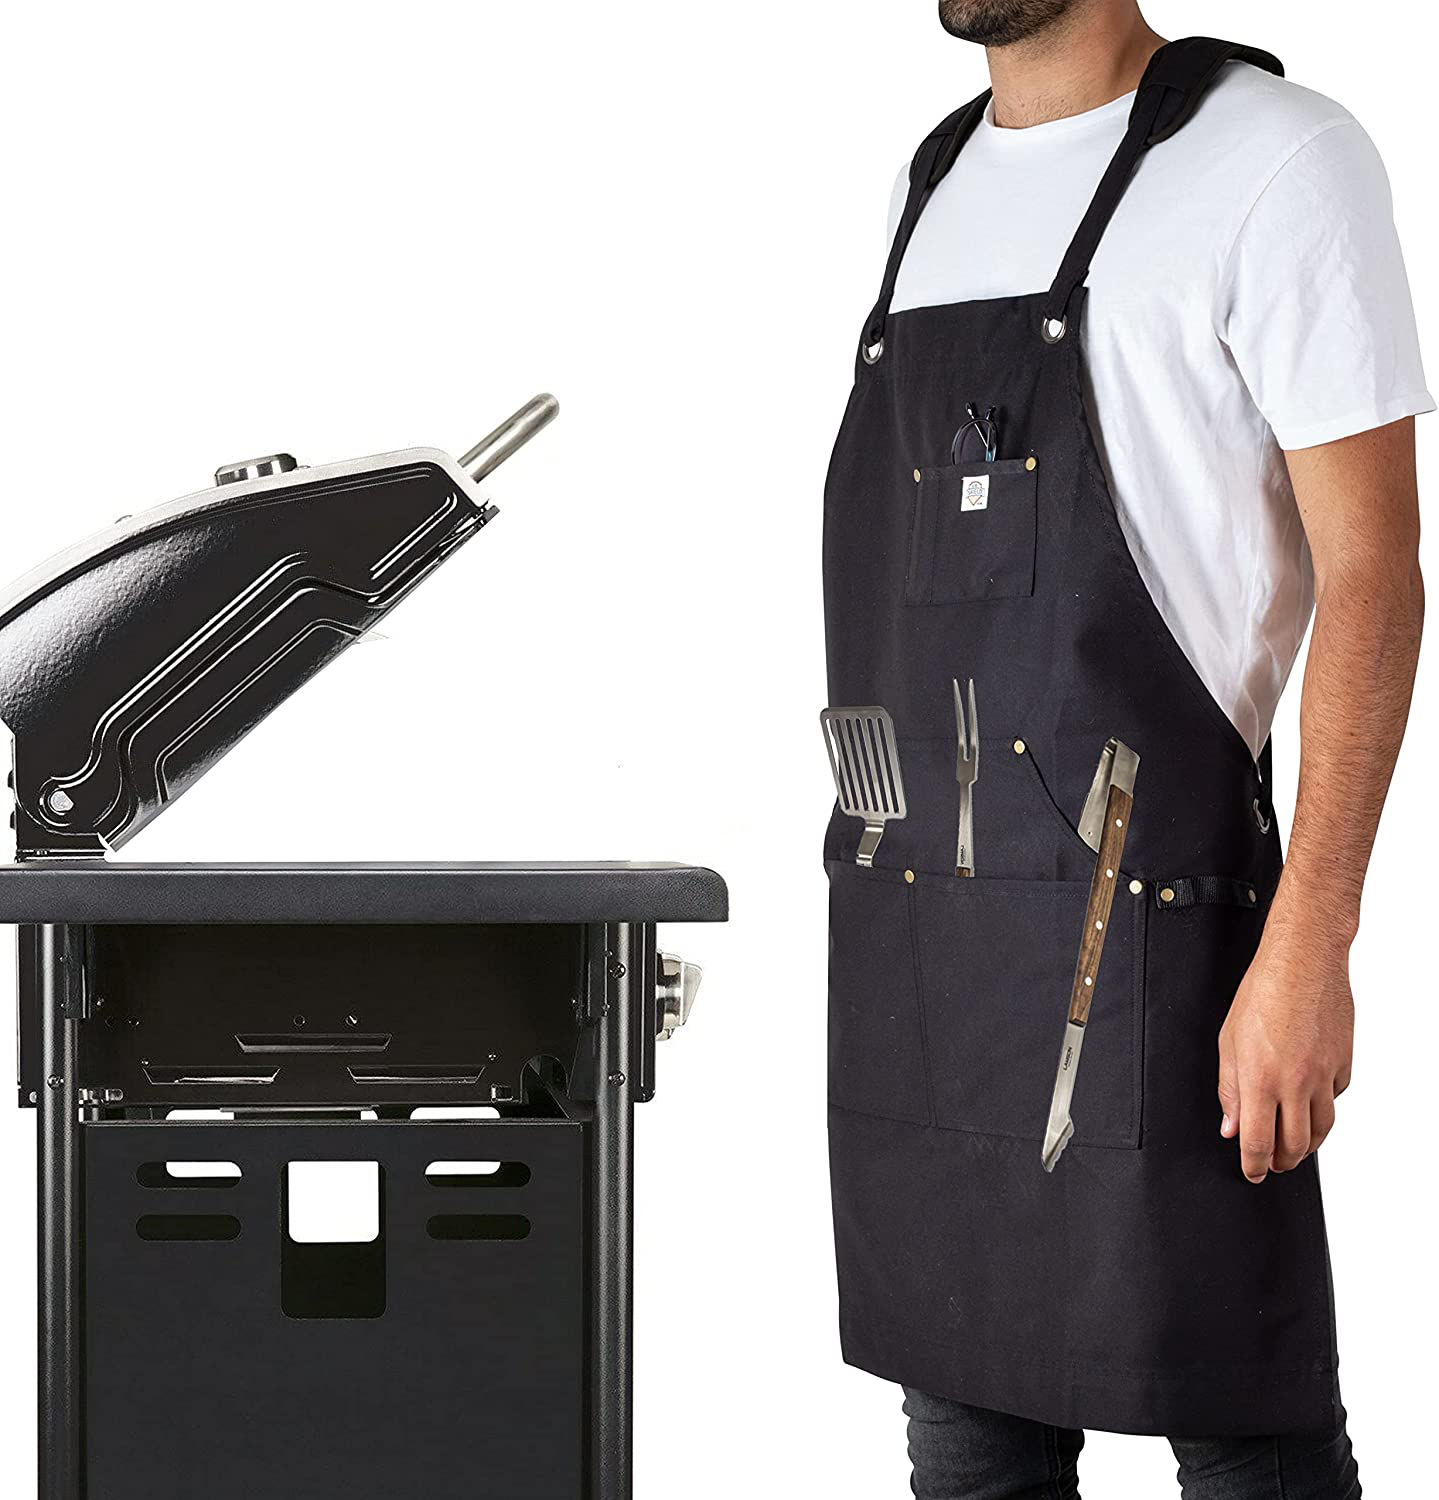 Ur-Shield bbq Apron for Man - Fire Retardant Apron – Premium Cooking Apron with Convenient Pockets – Real Flame Resistant Work Apron for BBQ, Cooking, Grilling, Woodwork